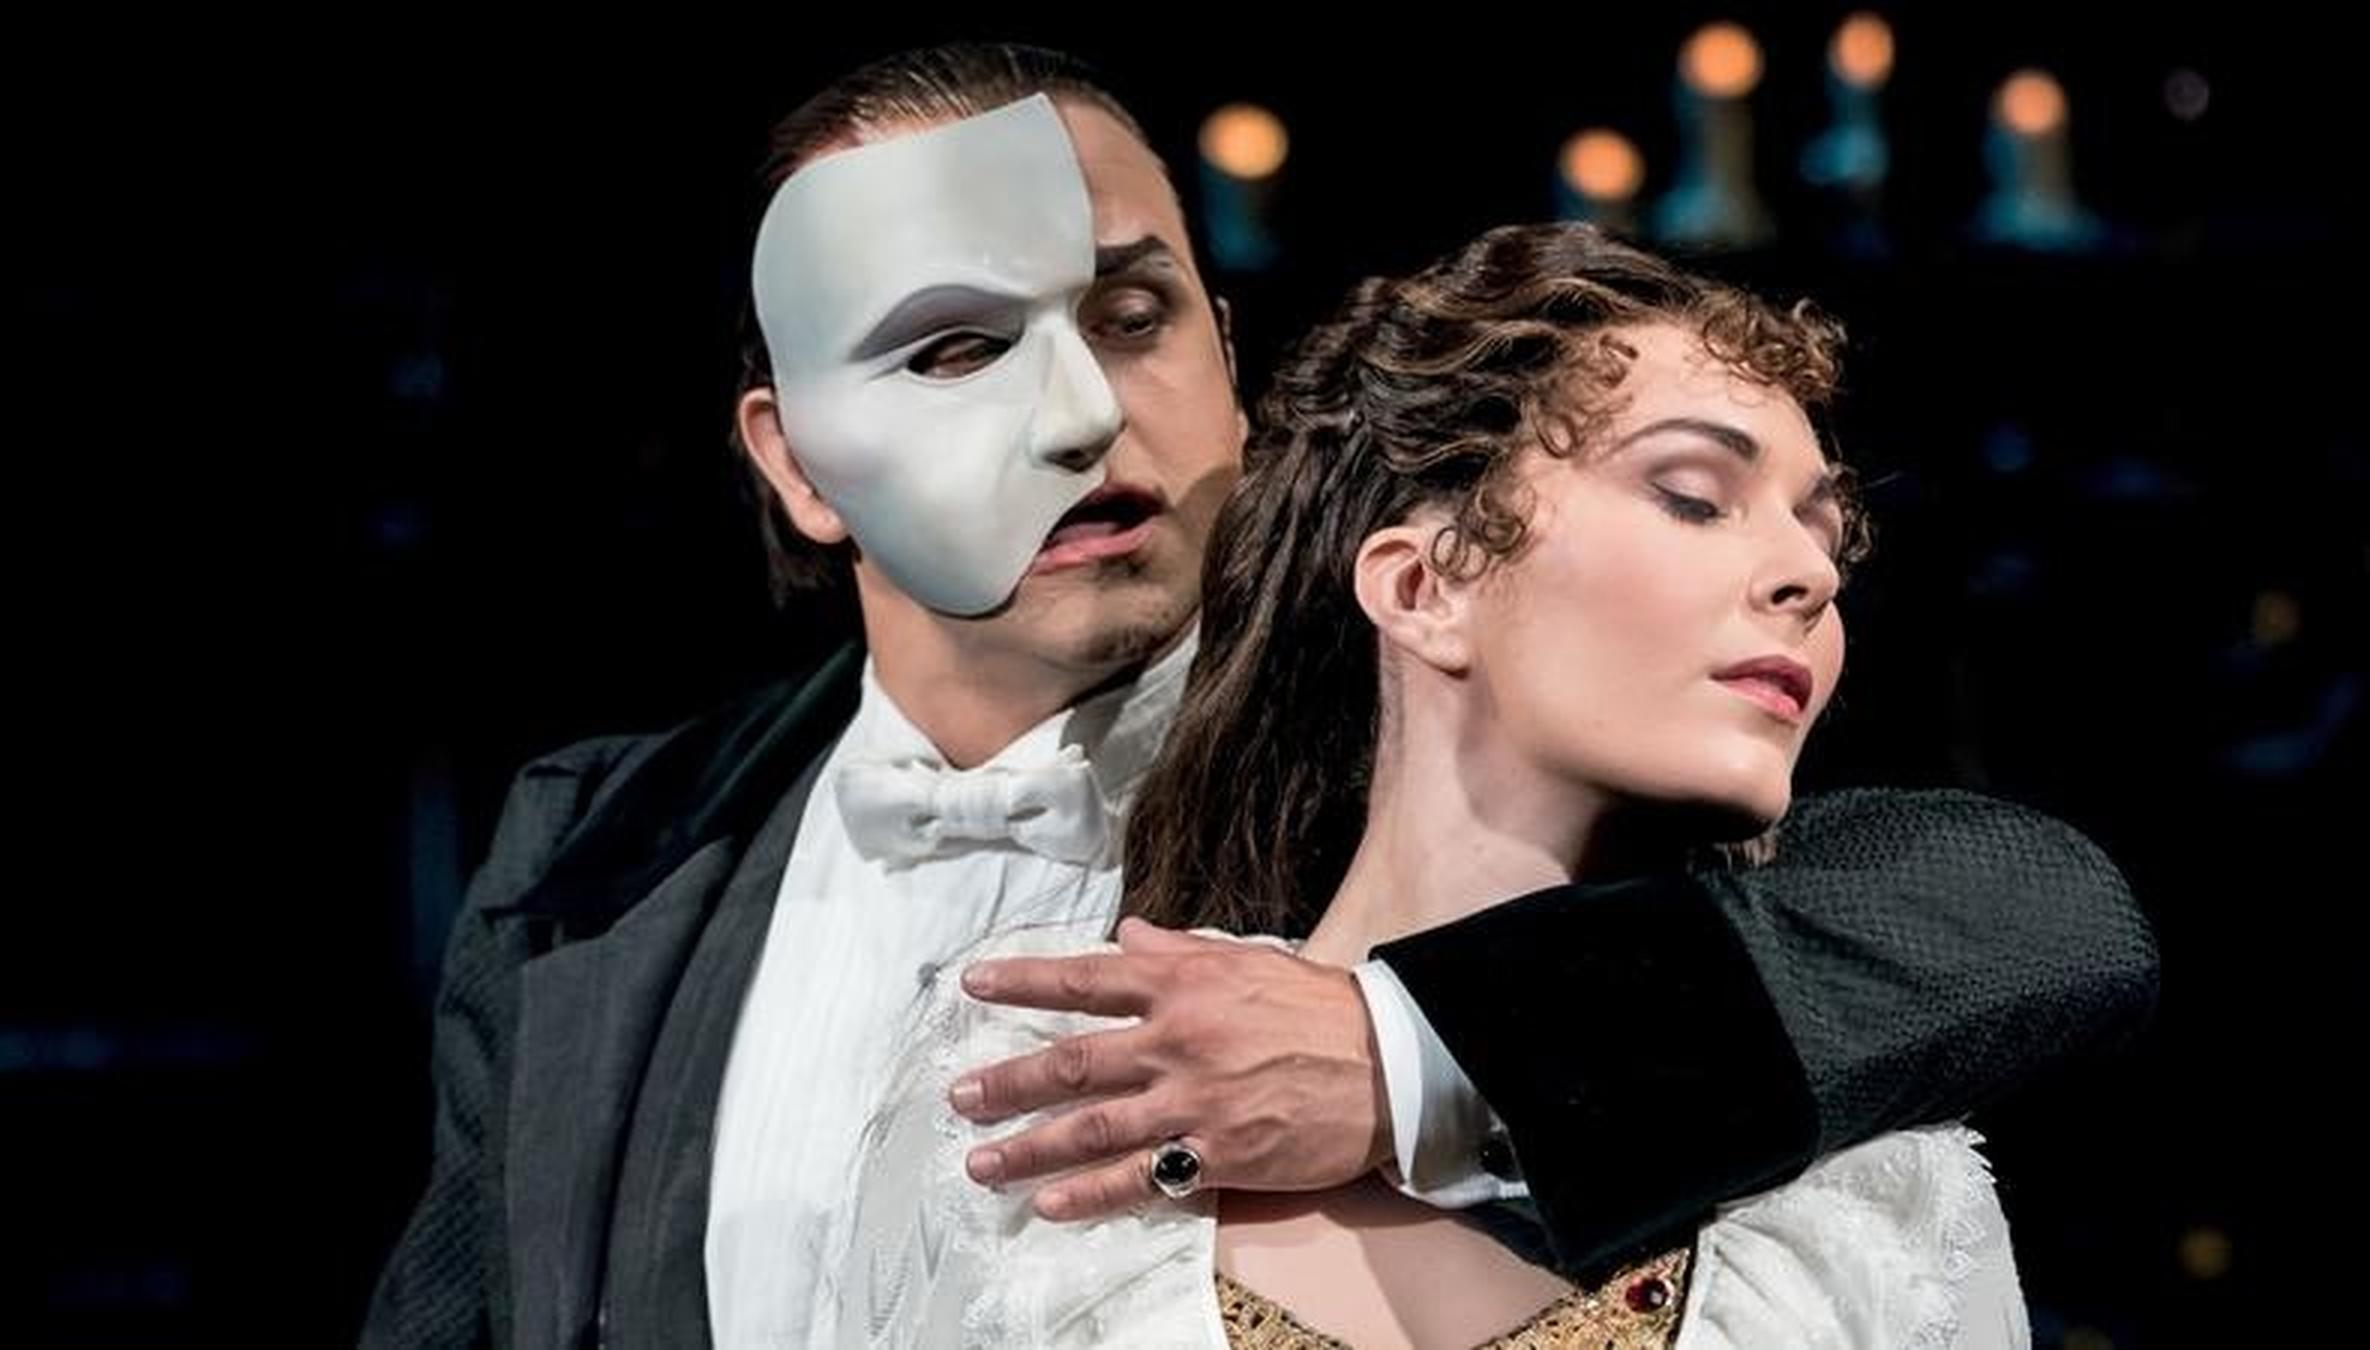 Now Casting Play a Lead in a Production of ‘The Phantom of the Opera